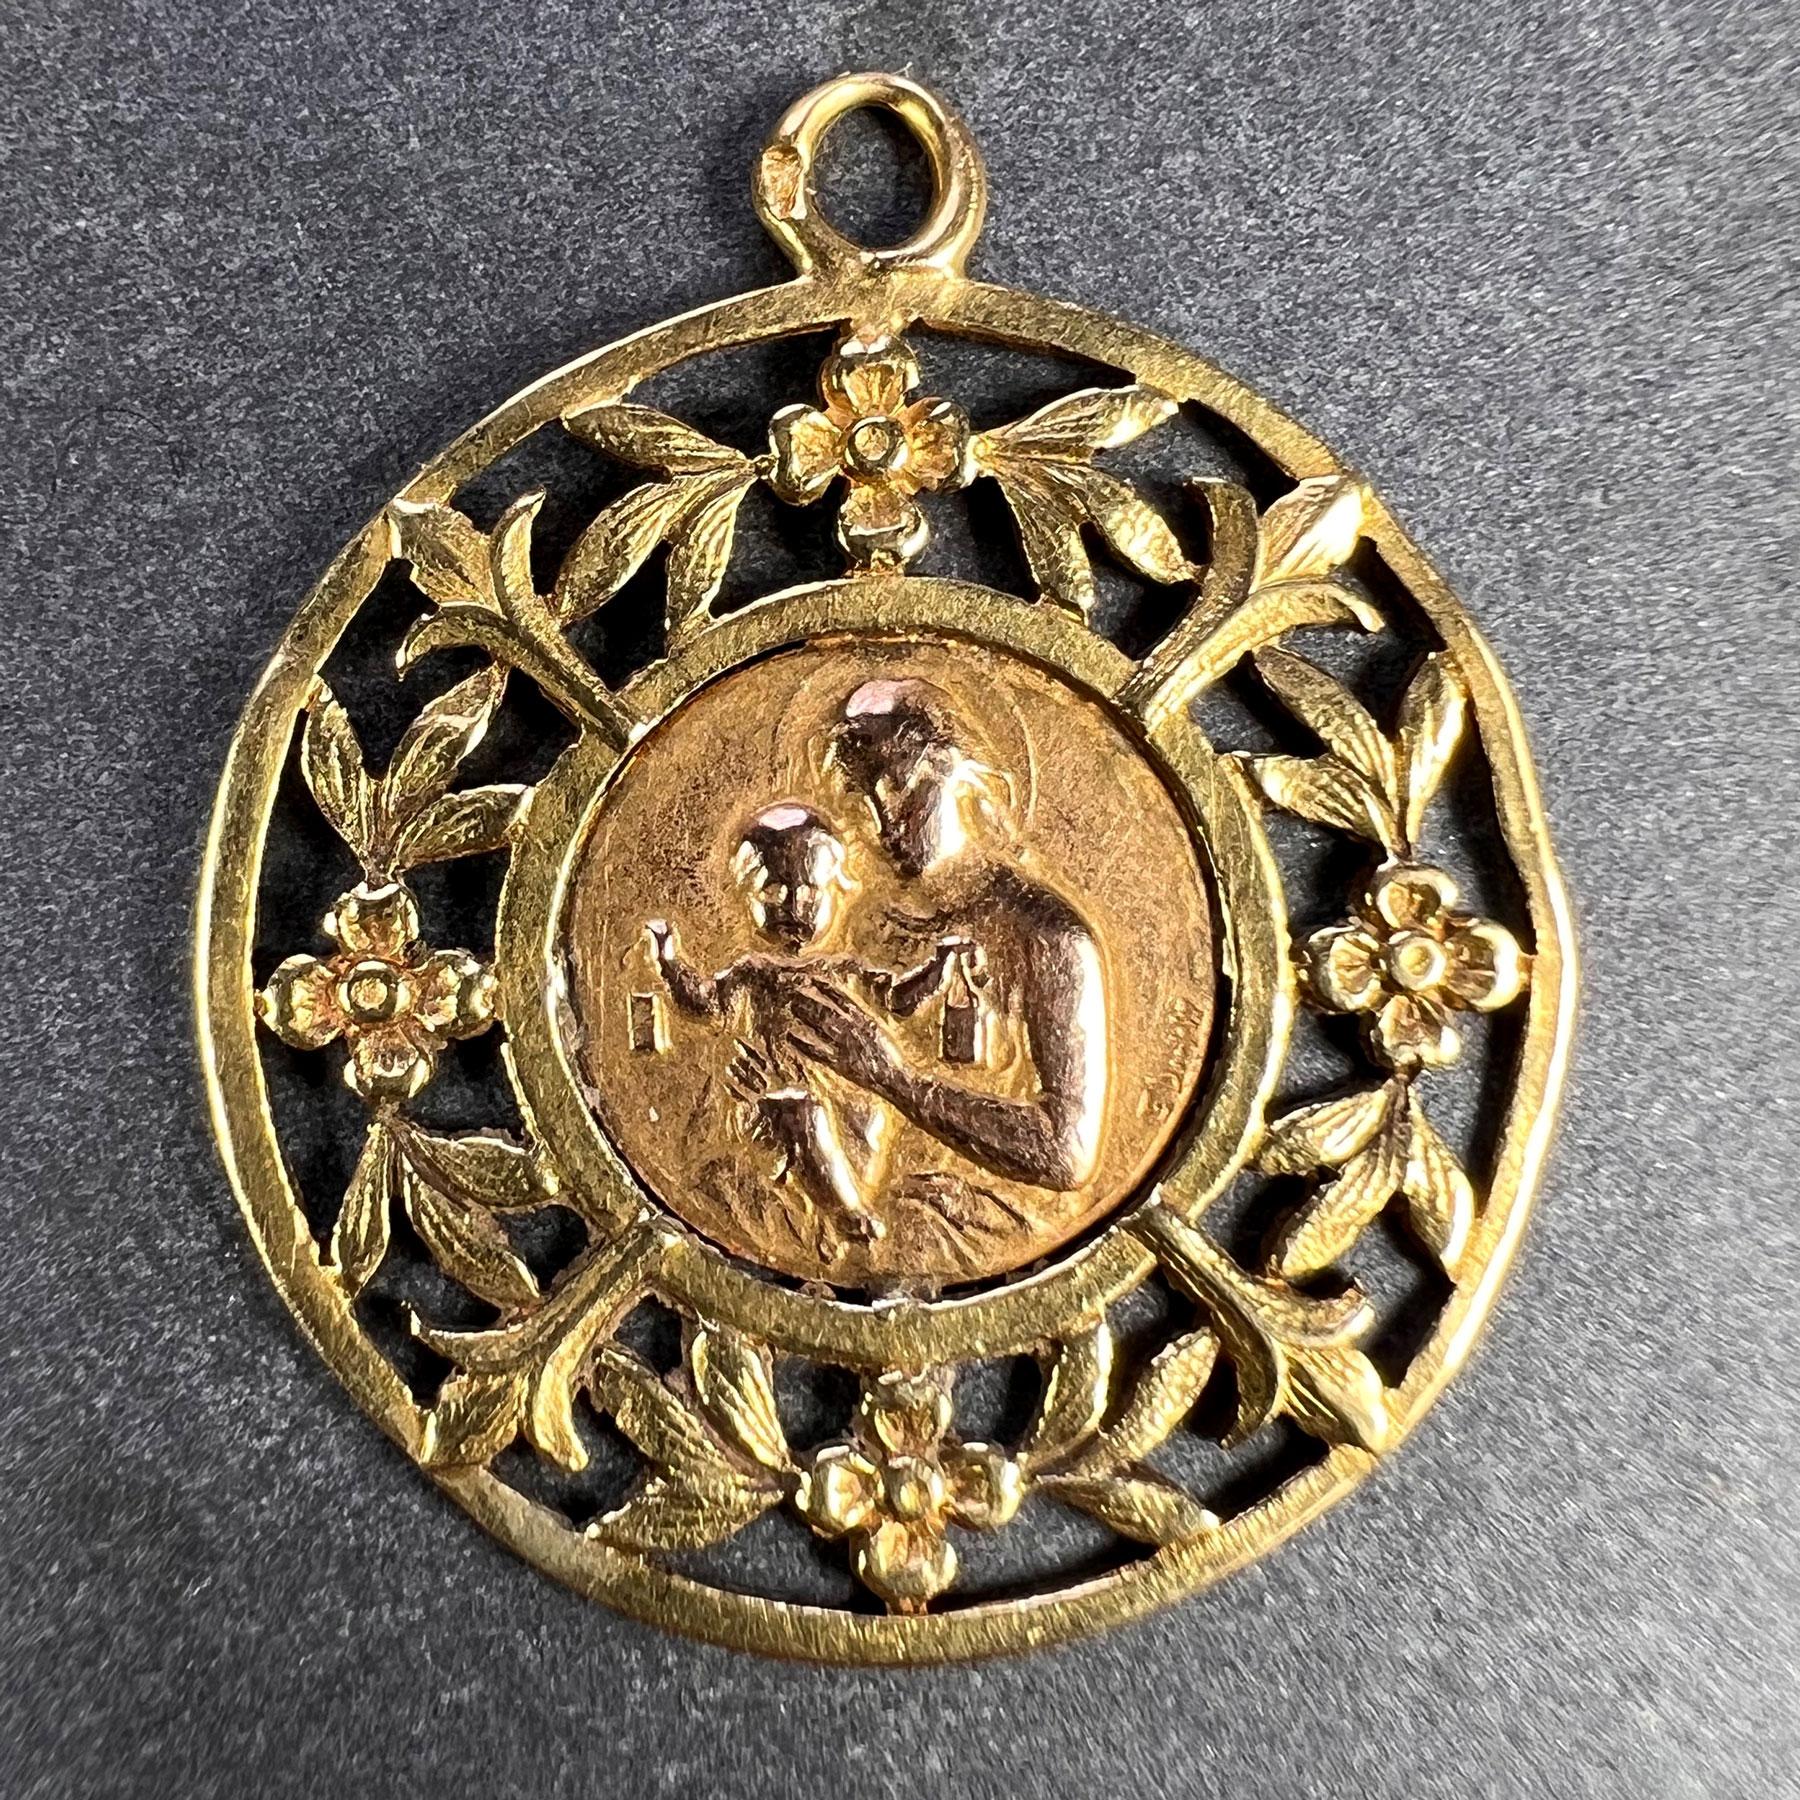 A French 18 karat (18K) yellow and rose gold charm pendant designed as a rose gold medal depicting the Madonna and Child signed by E. Dropsy, surrounded by a yellow gold floral frame. The reverse is engraved with a monogram of YP. Stamped with the